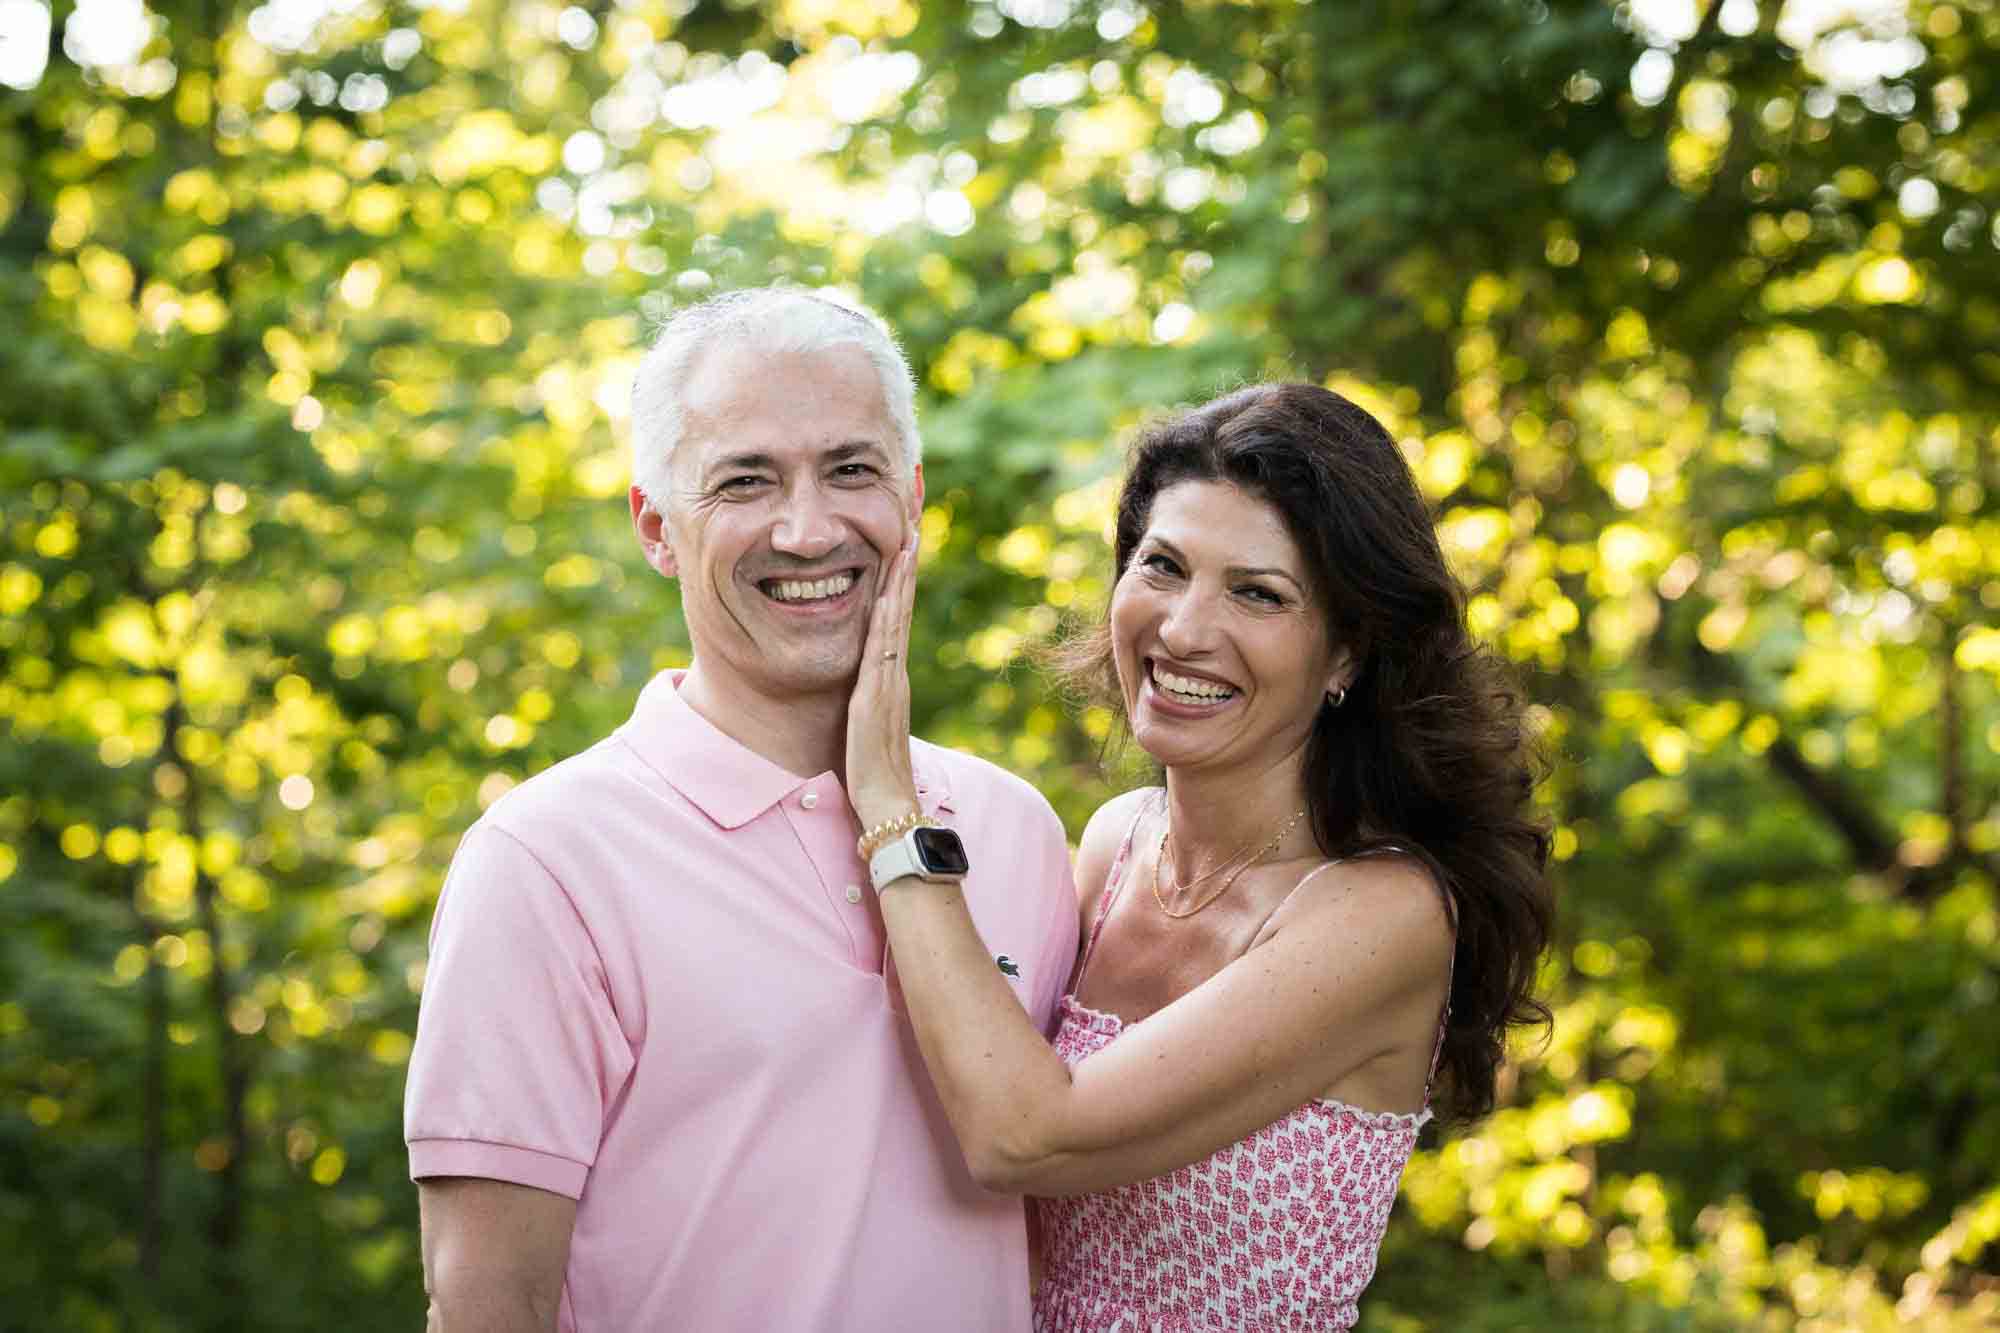 Couple standing in front of trees with woman's hand on man's cheek